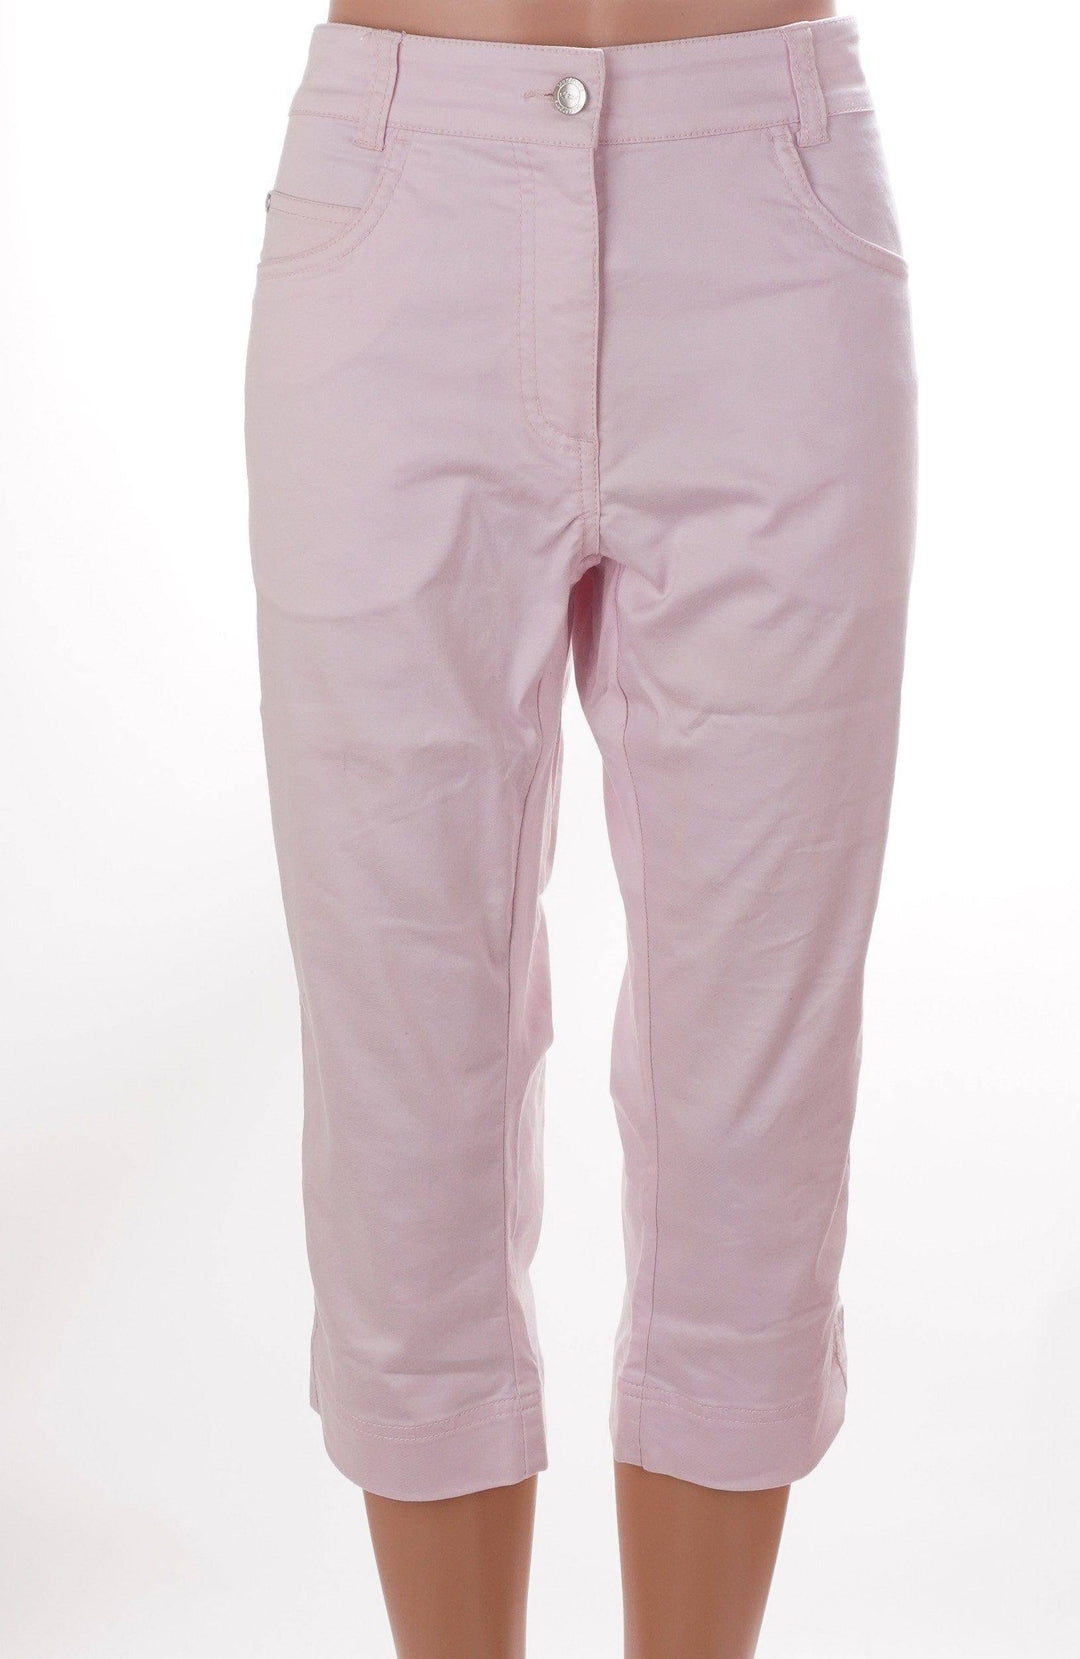 Daily Sports Light Pink / 14 / Consigned Daily Sports Pant - Light Pink - Size 14